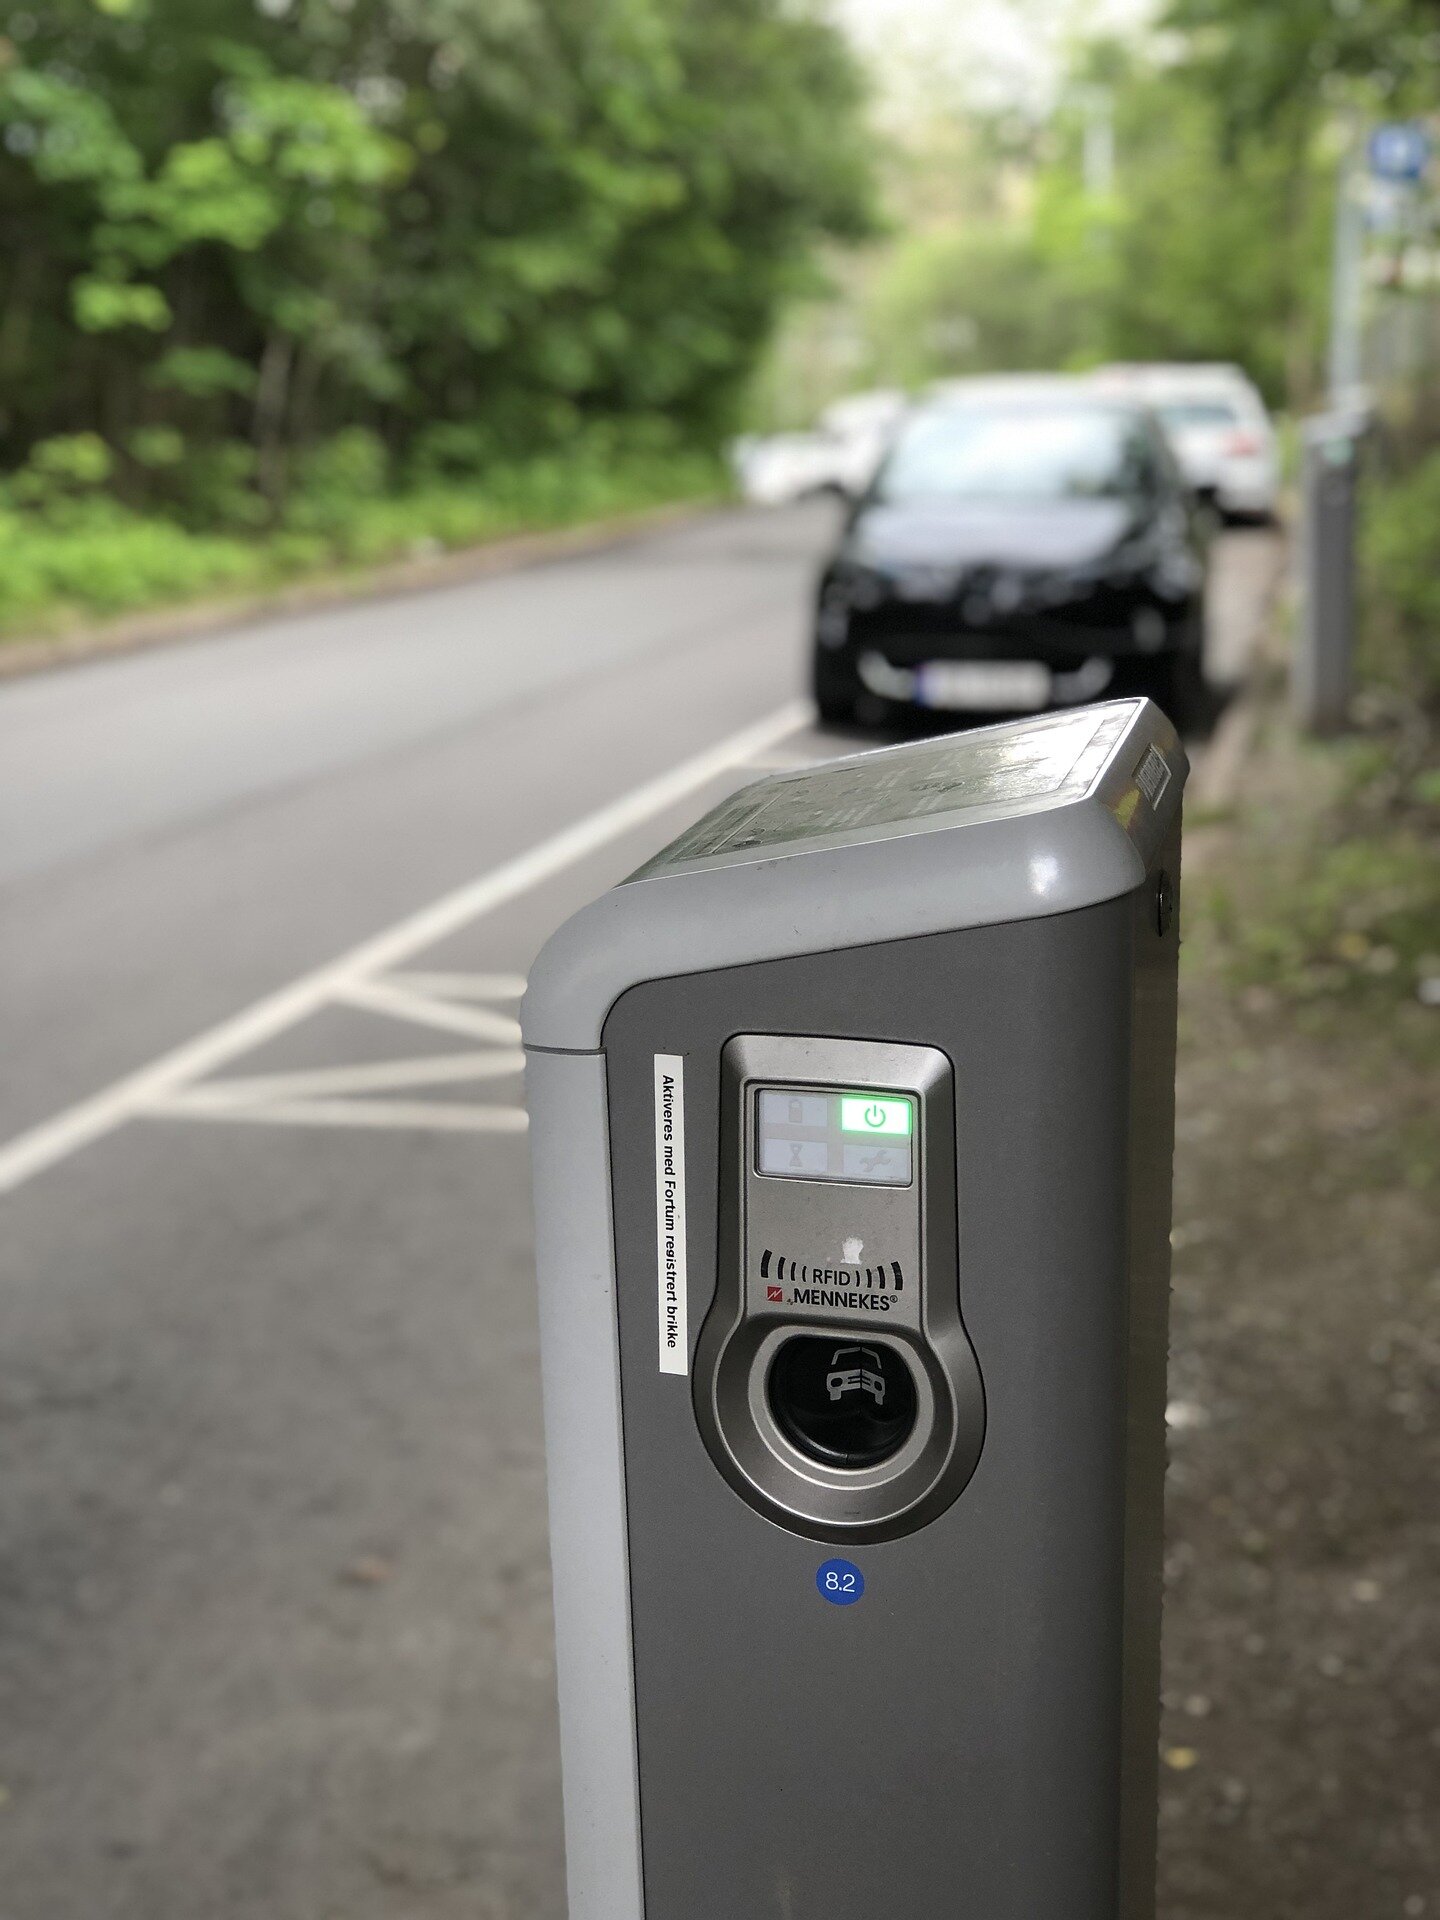 New report tackles electric vehicle charging payment challenges and offers key recommendations